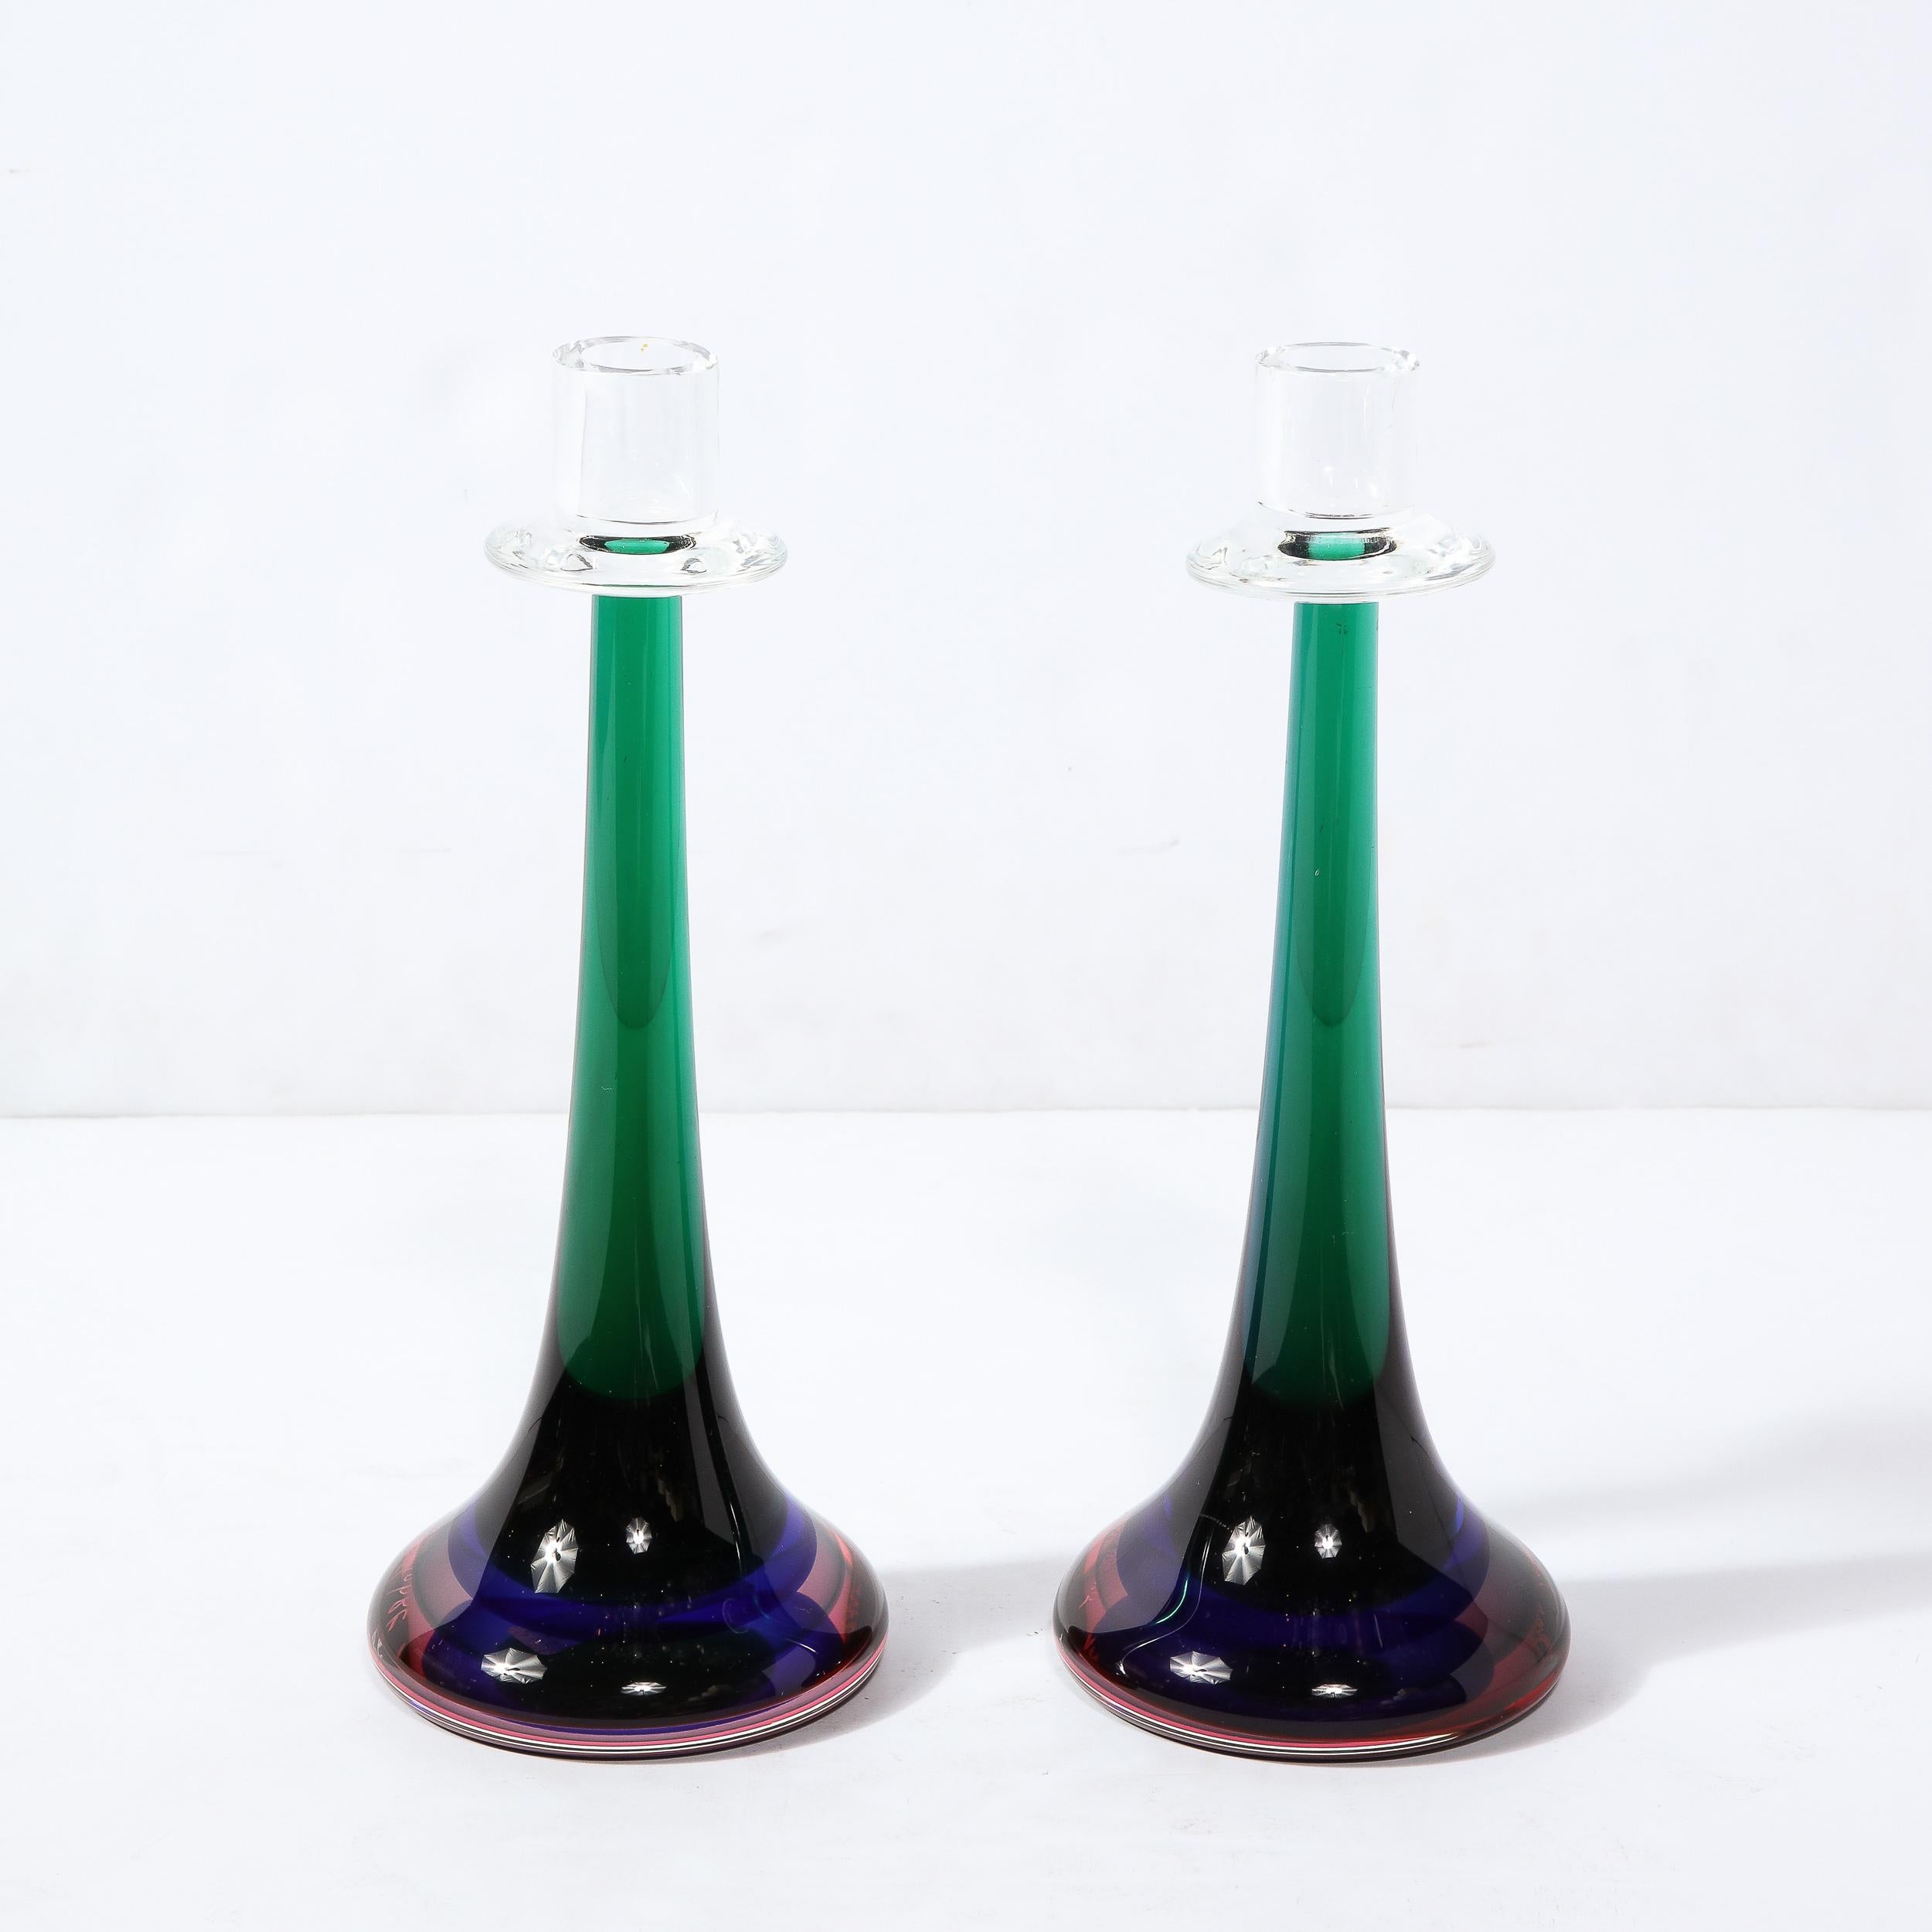 This stunning pair of modernist candlesticks were handblown by the esteemed studio of Signoretti in Murano, Italy- the island off the coast of Venice renowned for centuries for its superlative glass production, circa 2010. They offer conical forms